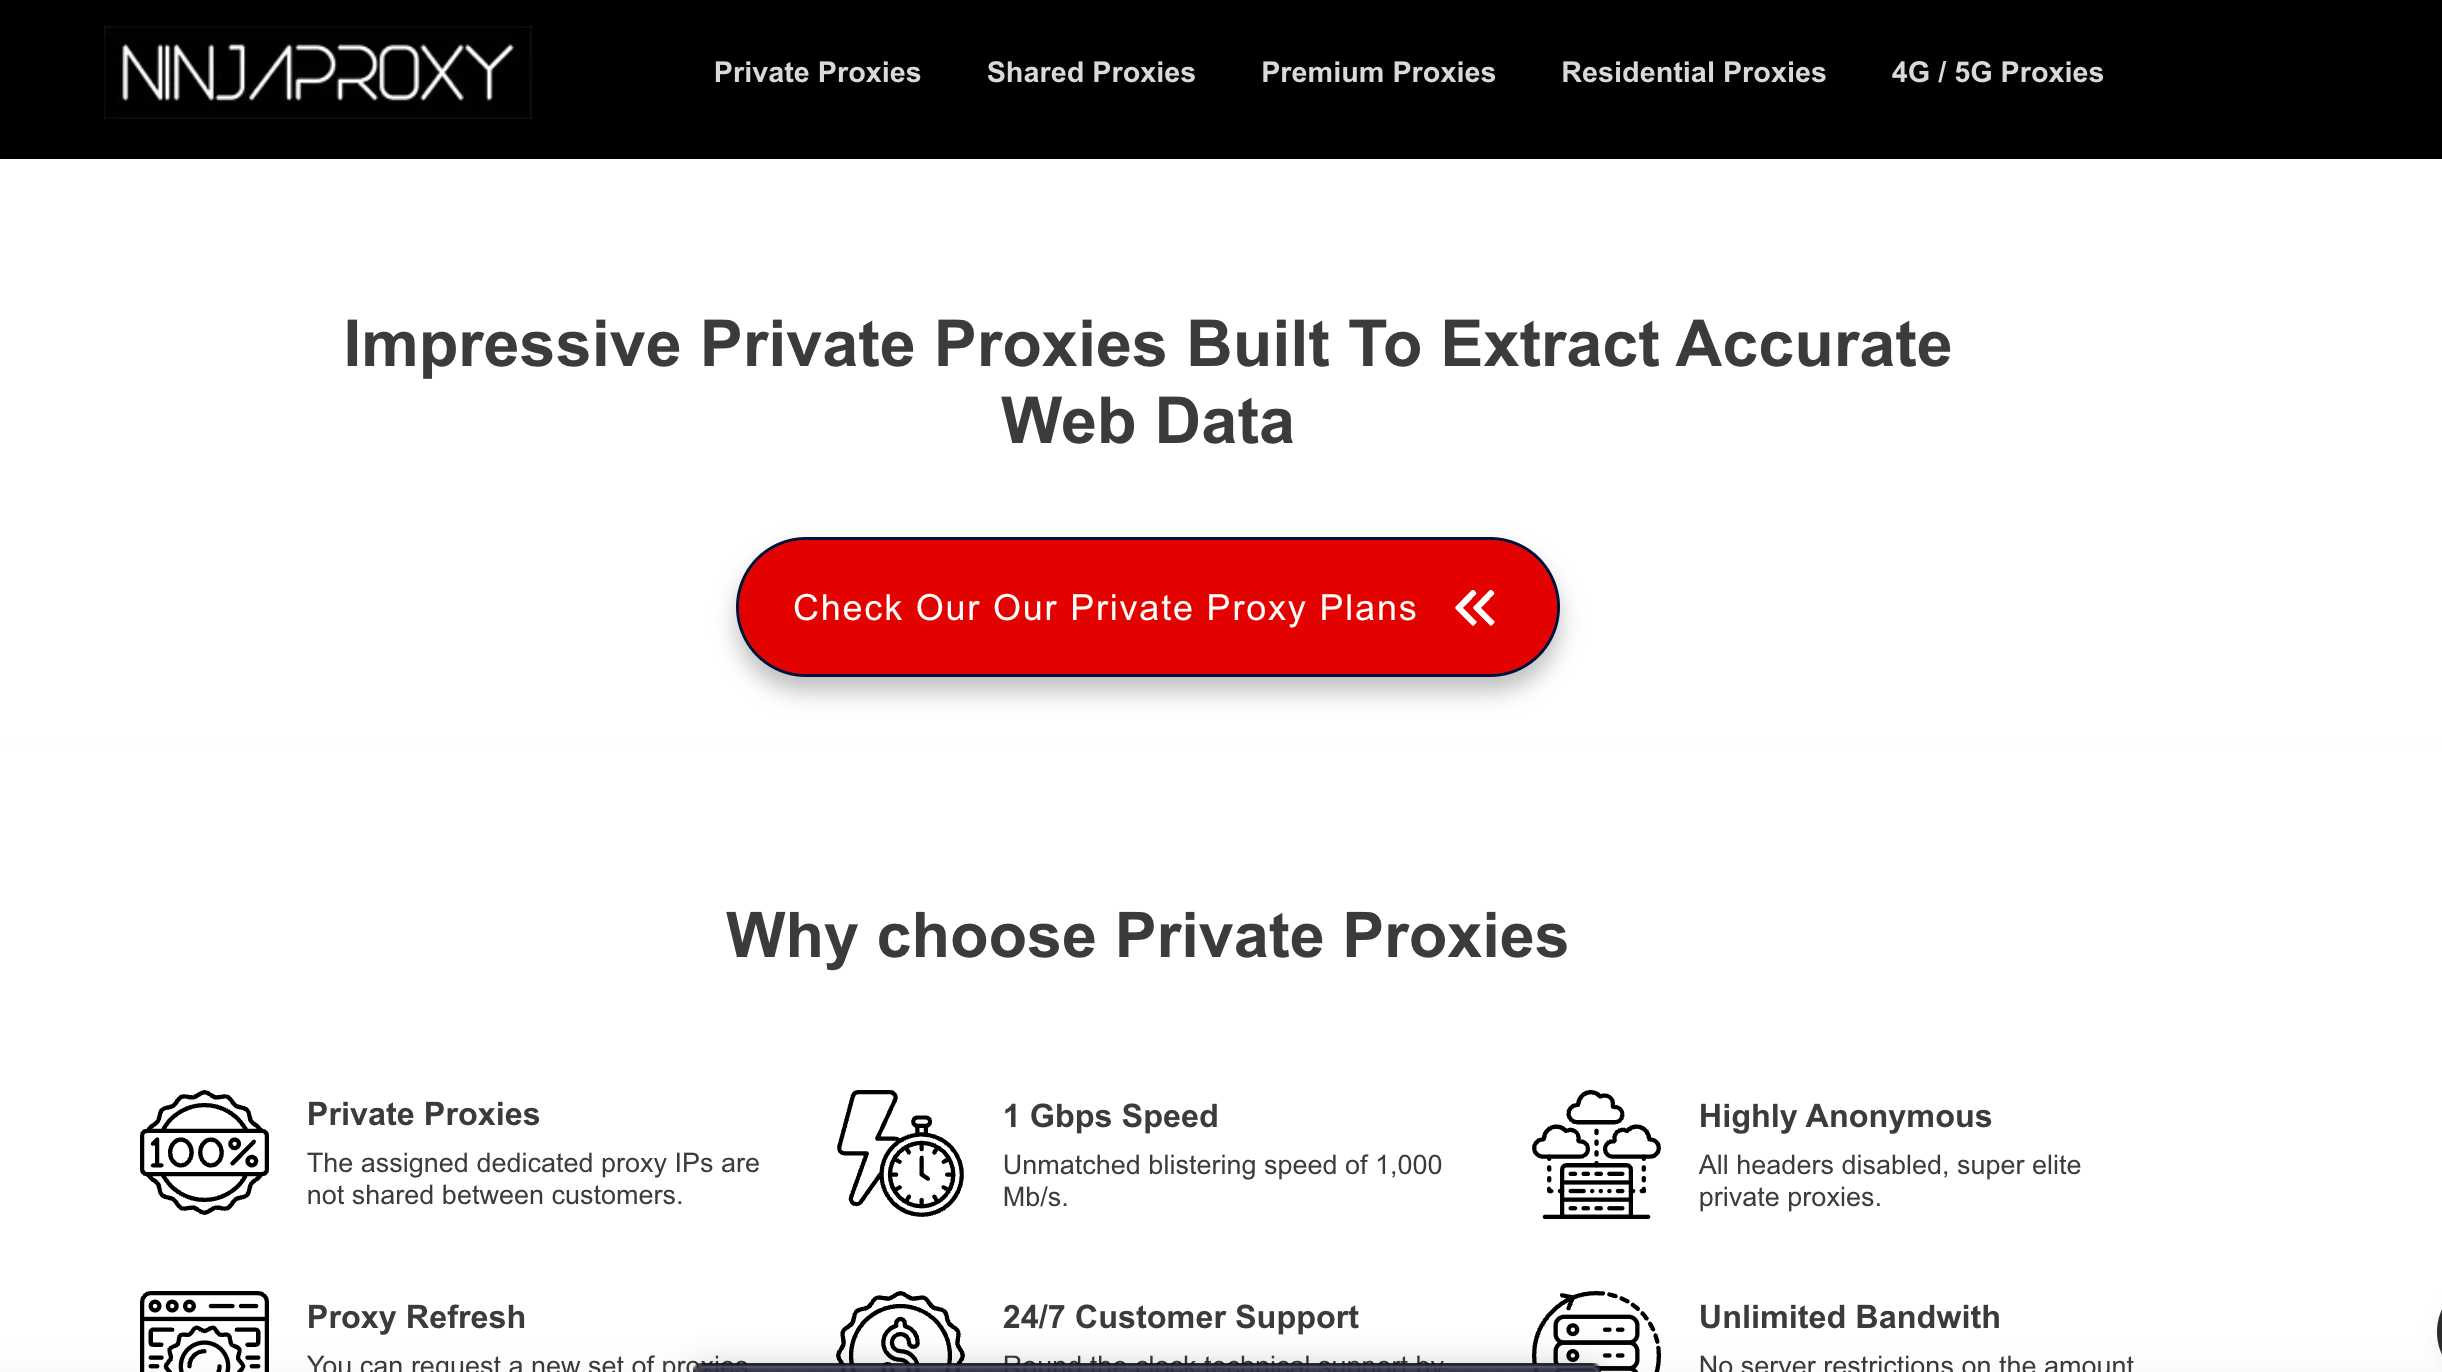 Private Proxies Services Offered By NinjaProxy